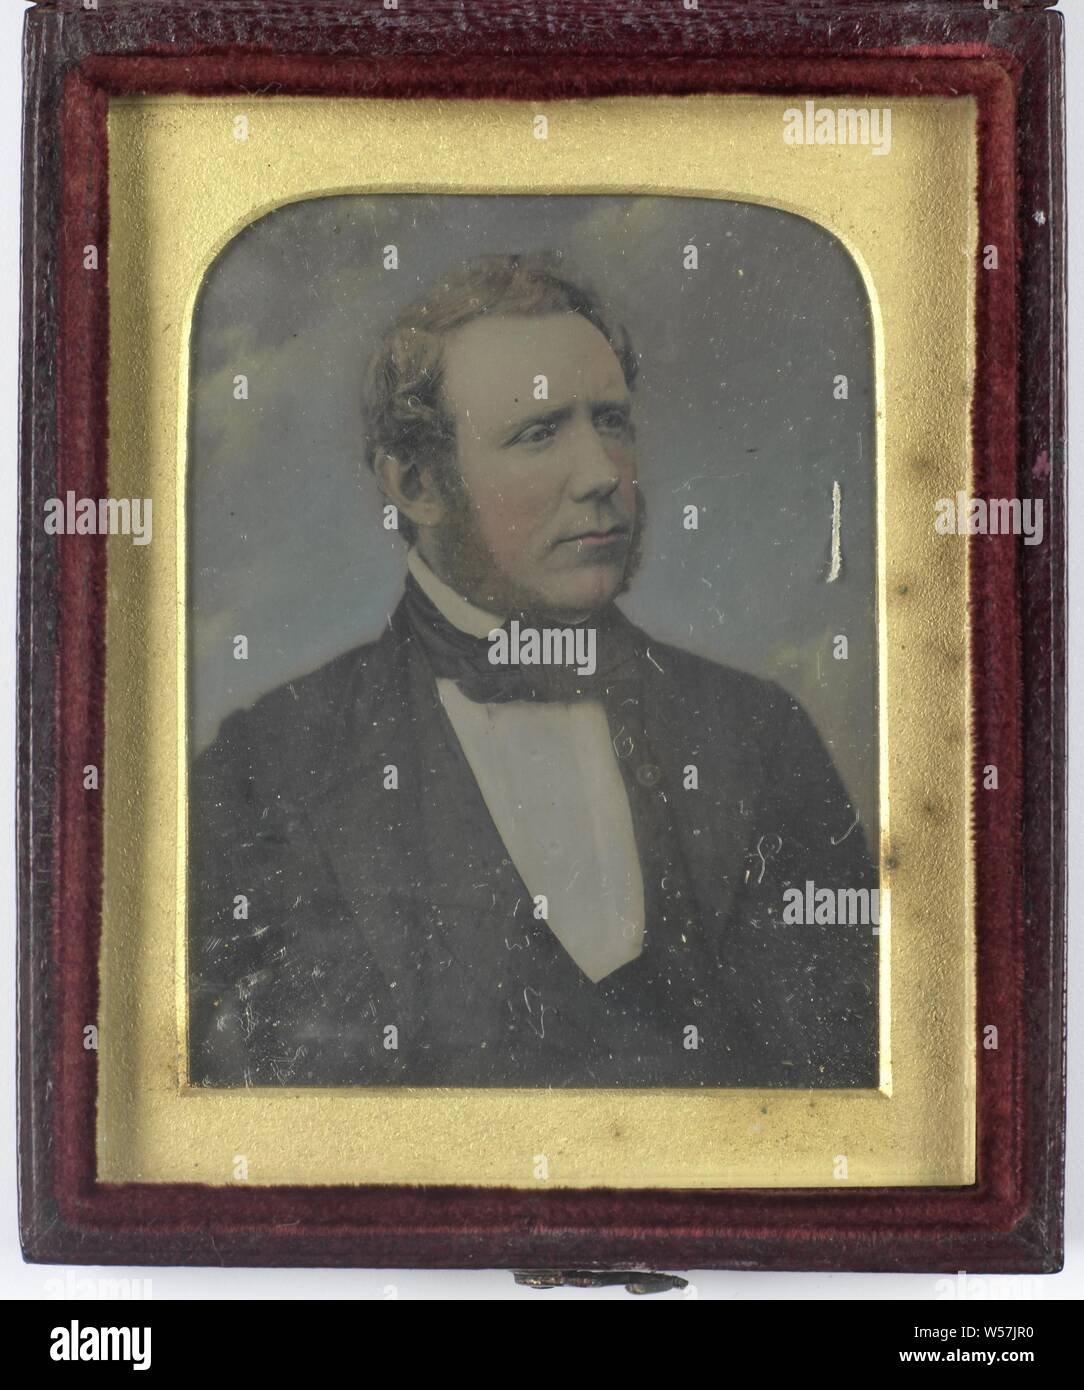 Portrait of an unknown man, historical persons, adult man, sideburns, Richard Beard (mentioned on object), 1841 - 1850, copper (metal), glass, leather, velvet (fabric weave), h 50 mm × w 39 mm h 59 mm × w 70 mm × t 11 mm Stock Photo